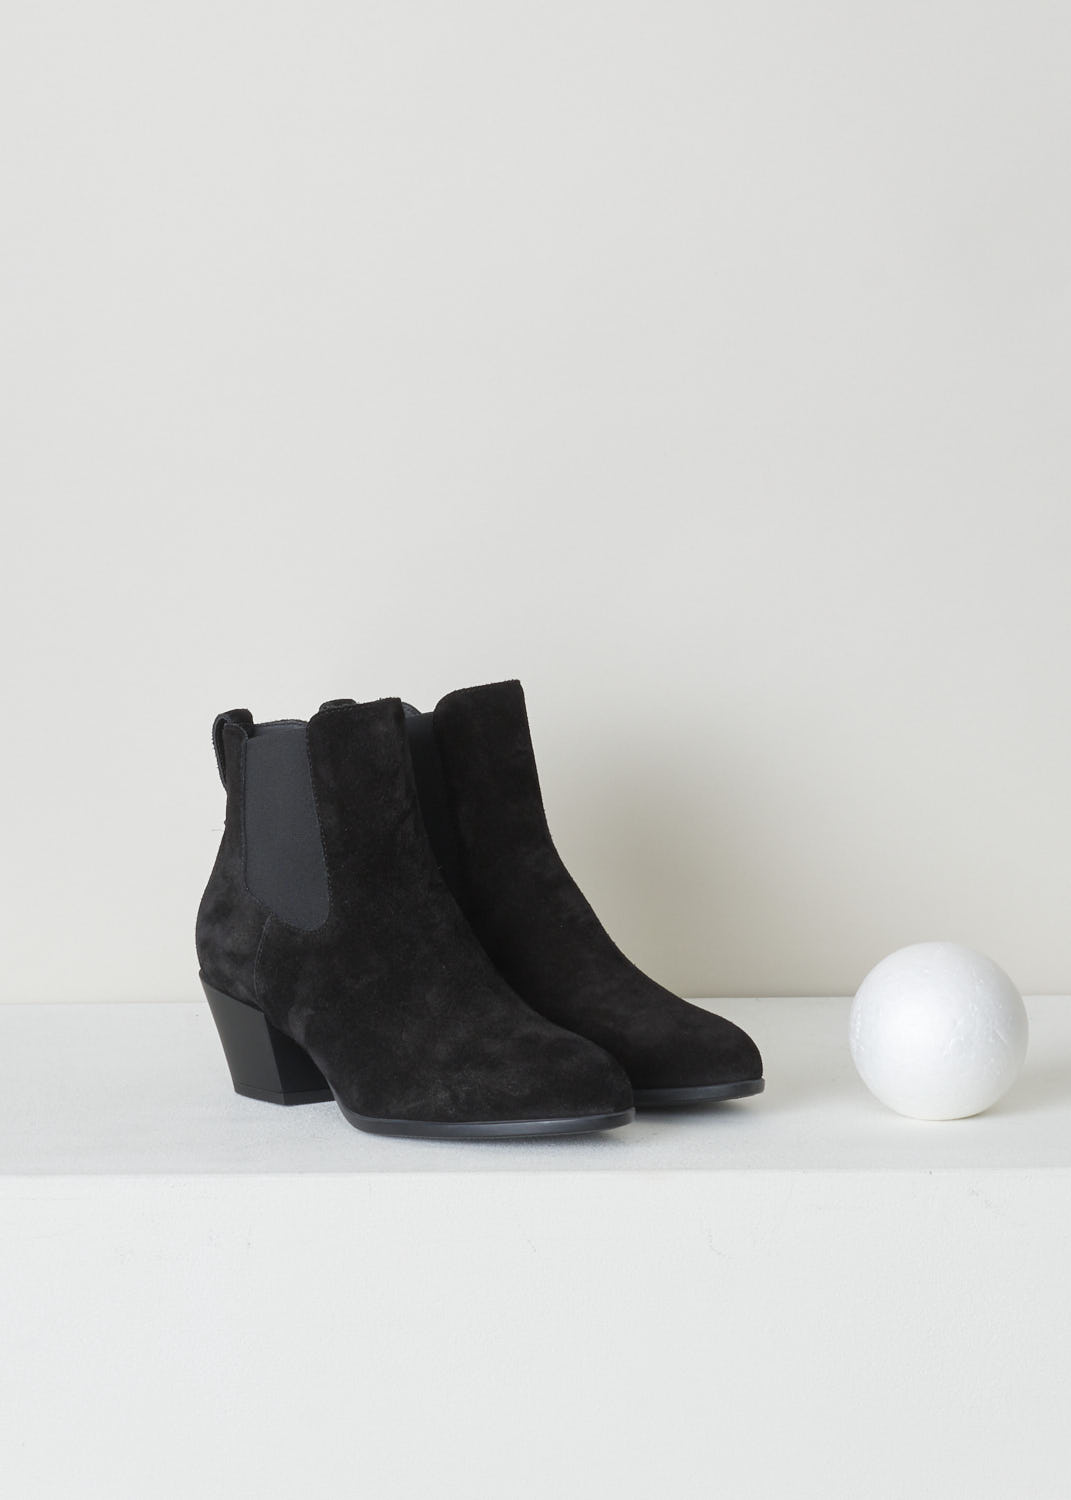 HOGAN, BLACK SUEDE CHELSEA BOOTS, HXW4010W890BYEB999, Black, Front, Black suede Chelsea boots featuring an elastic side panel and a pull tab on the back of the boot. These boots have a small heel and a pointed toe.  

Heel height: 5.5 cm / 2.1 inch
